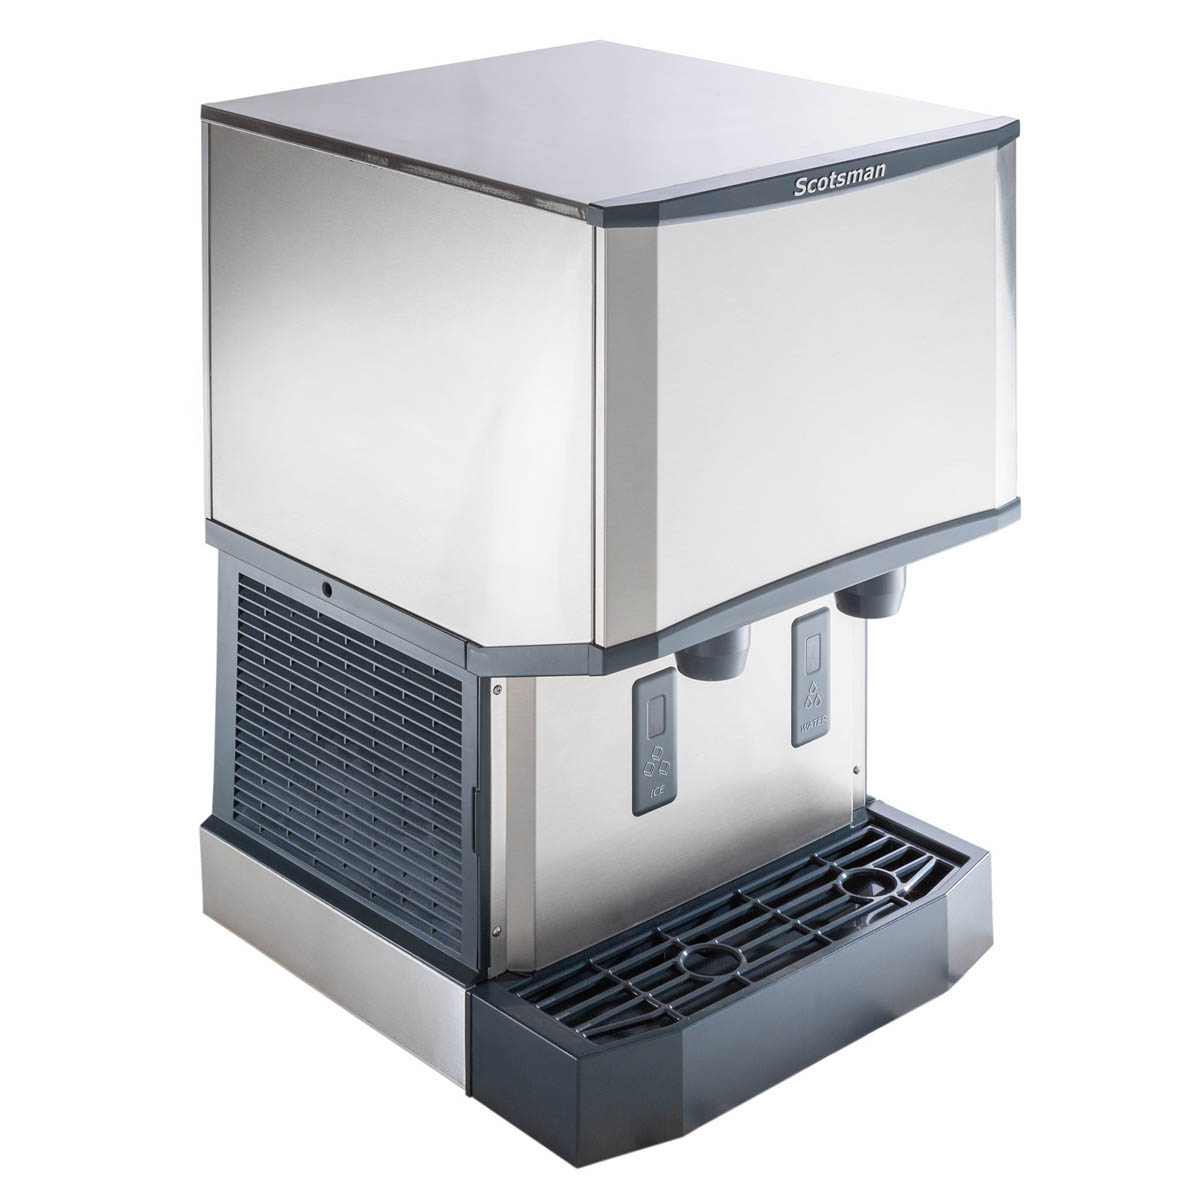 With Scotsman HID525W-1 Easy to Serve Ice For Your Customers, Chef's Deal